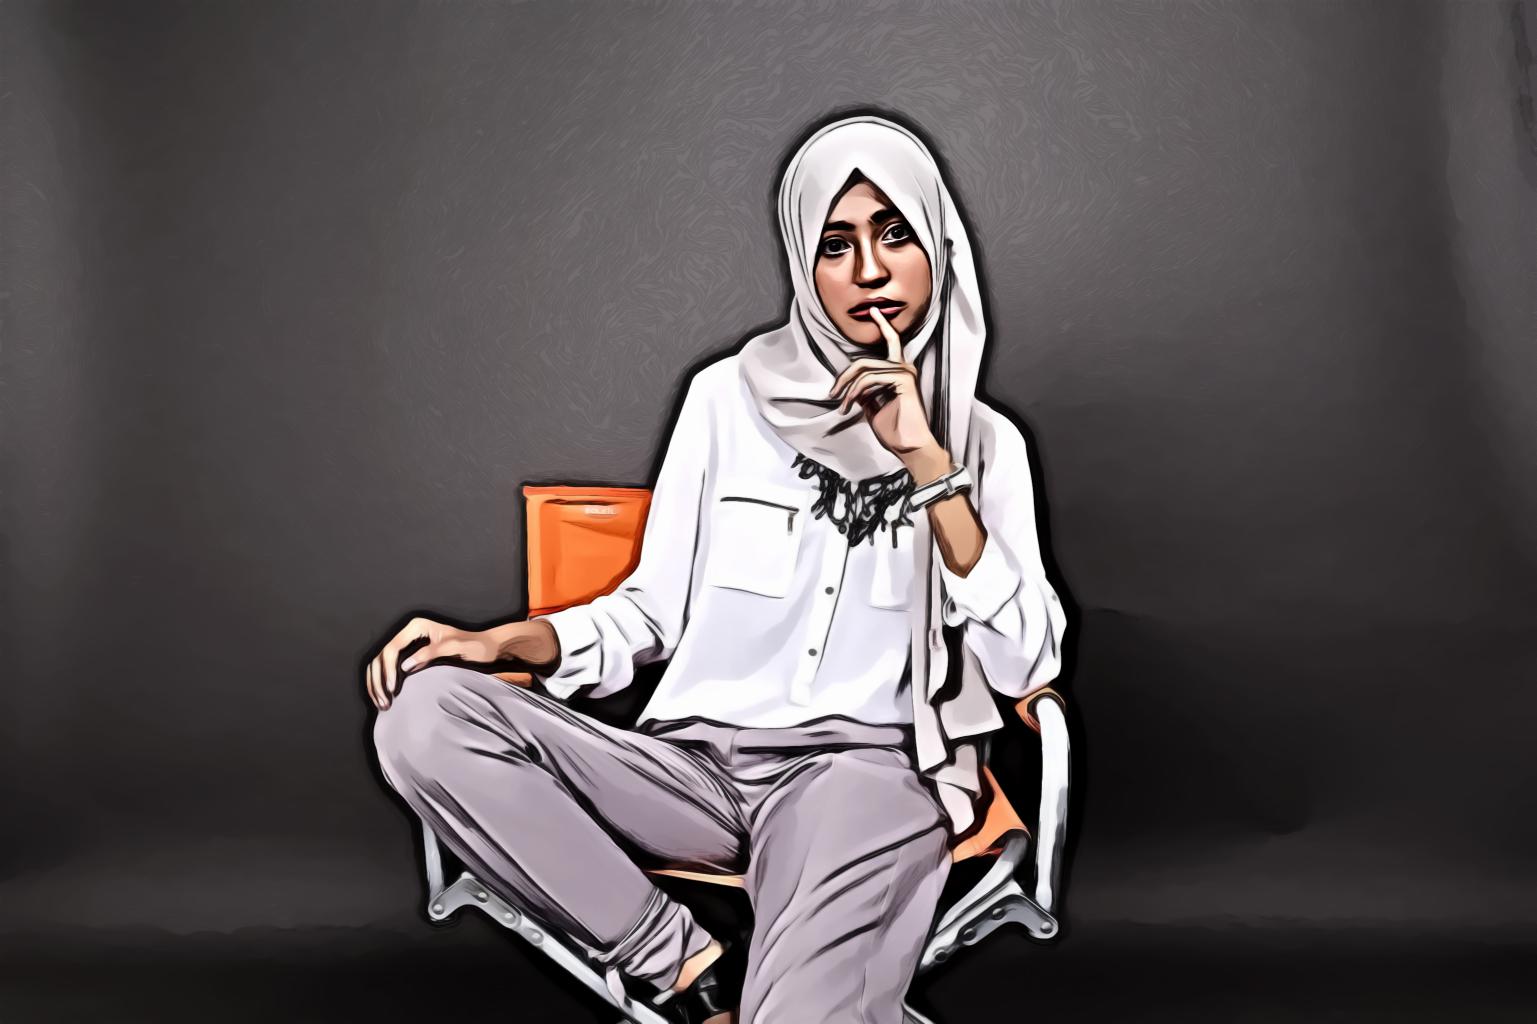 Woman Posing While Sitting on a Chair